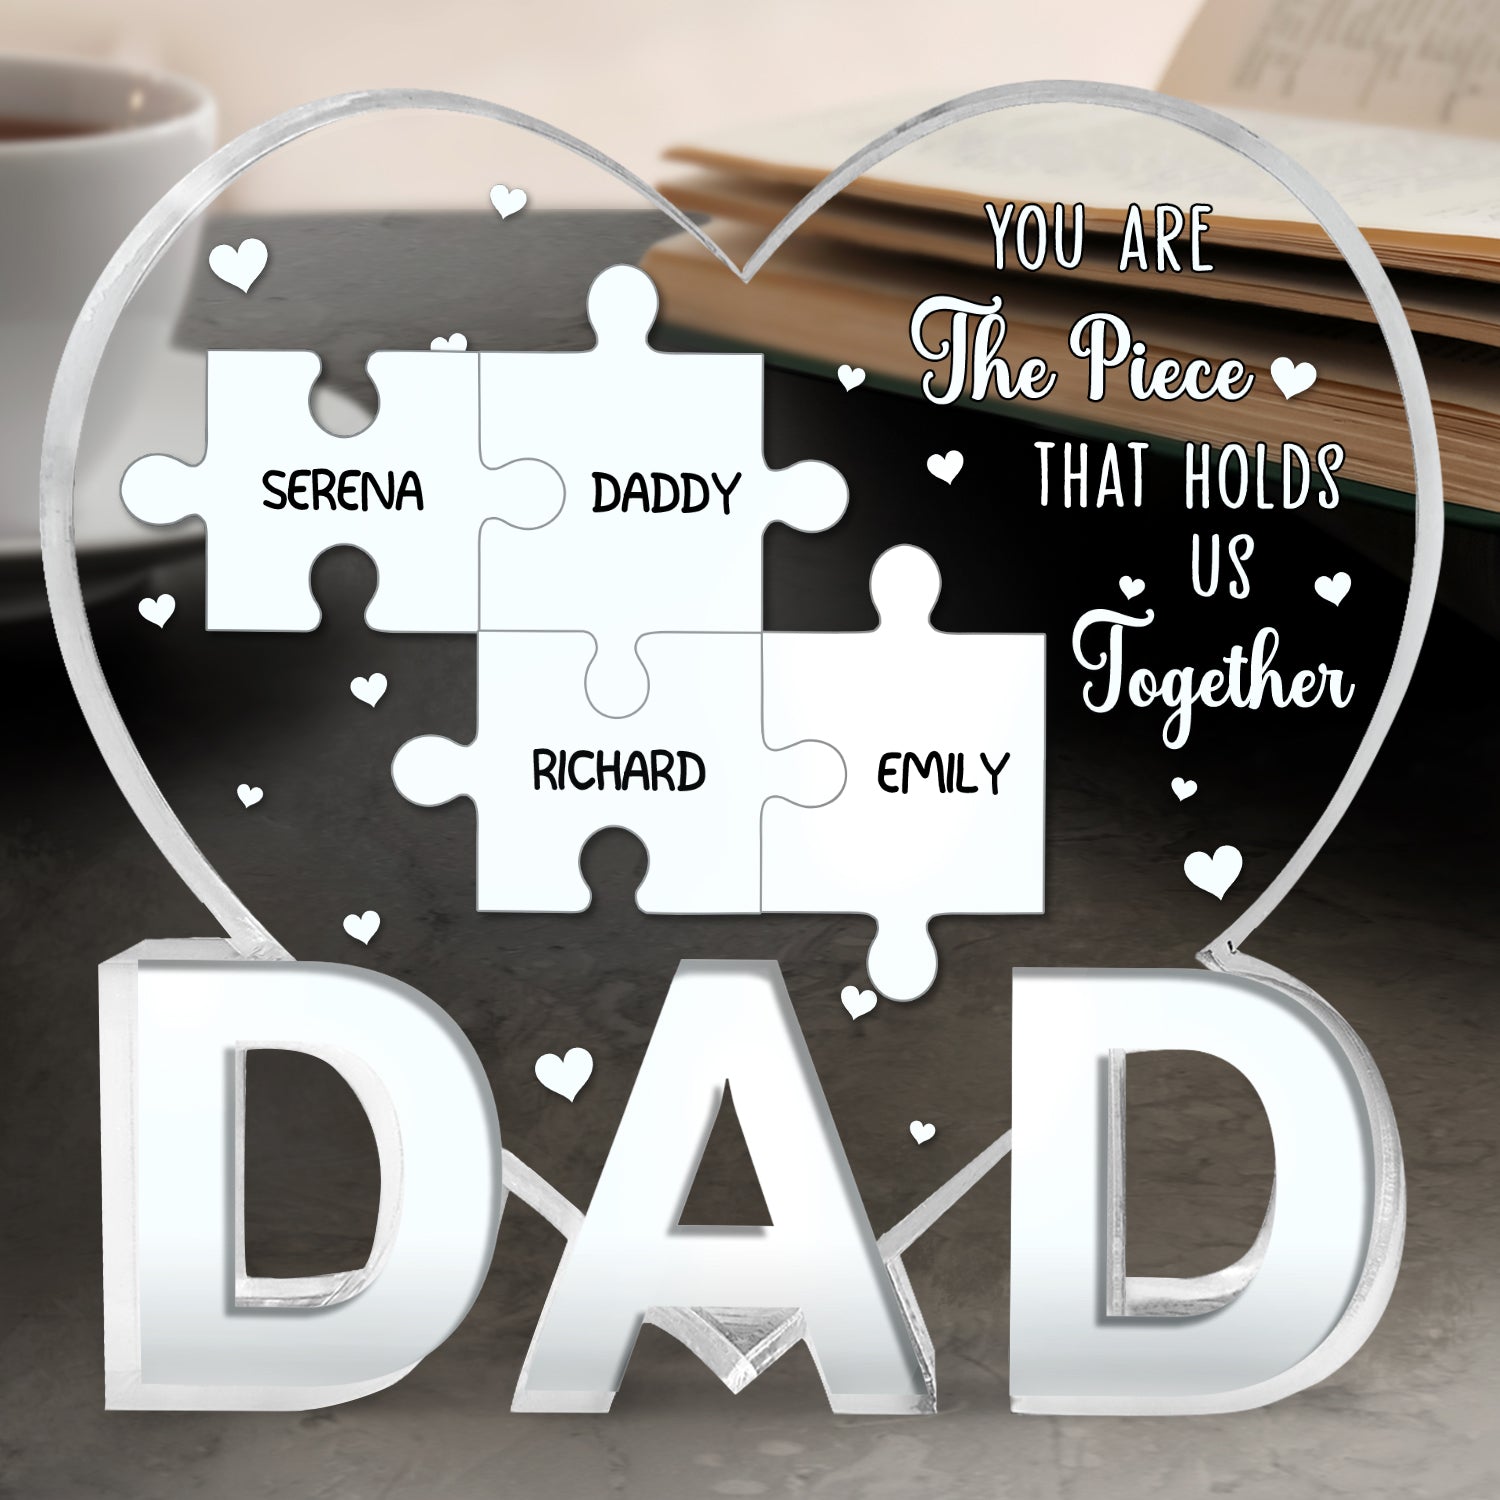 Dad You Are The Piece That Holds Us Together - Birthday, Loving Gift For Daddy, Father - Personalized Love-Dad-Shaped Acrylic Plaque